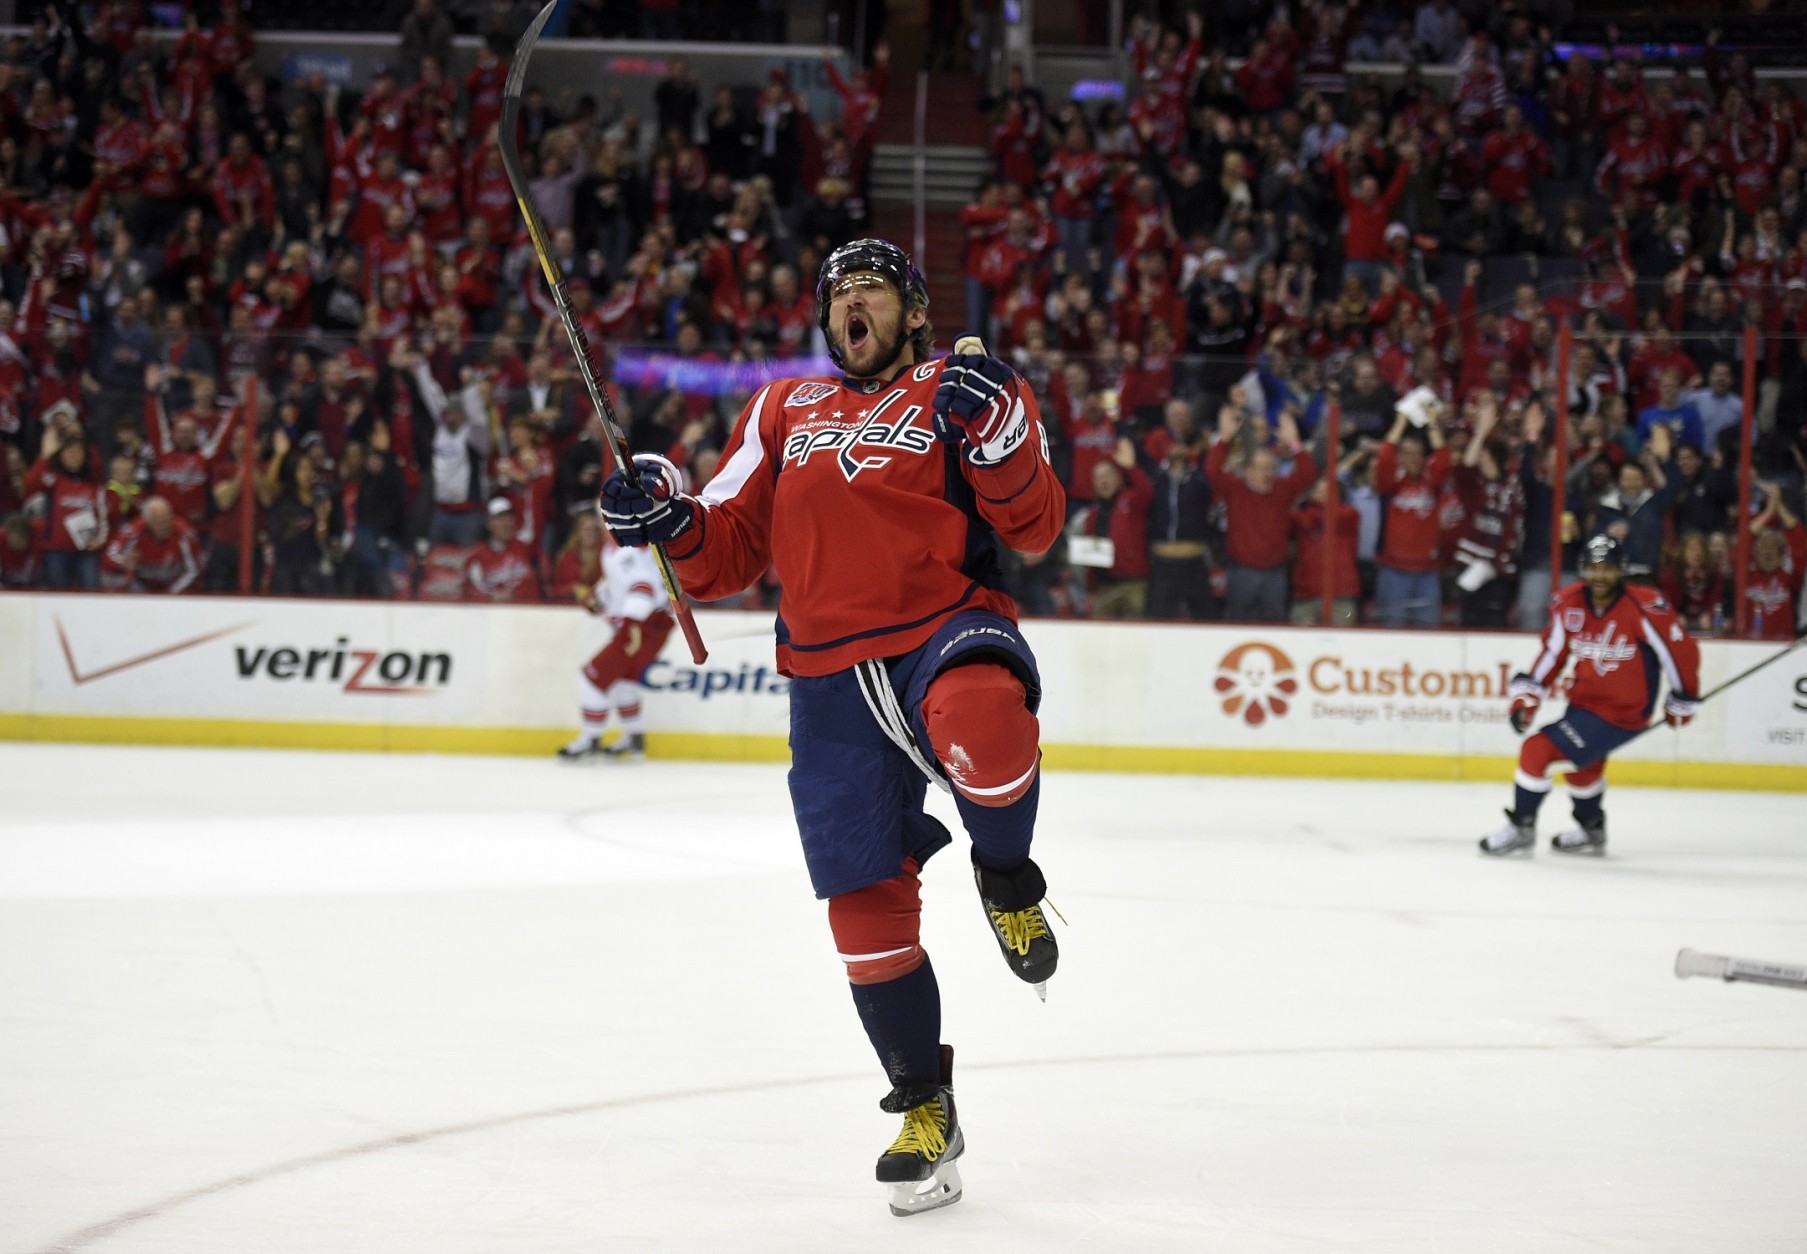 Washington Capitals left wing Alex Ovechkin (8), of Russia, celebrates his goal against the Carolina Hurricanes during the first period of an NHL hockey game, Tuesday, March 31, 2015, in Washington. It was Ovechkins' 50th goal of the year. (AP Photo/Nick Wass)